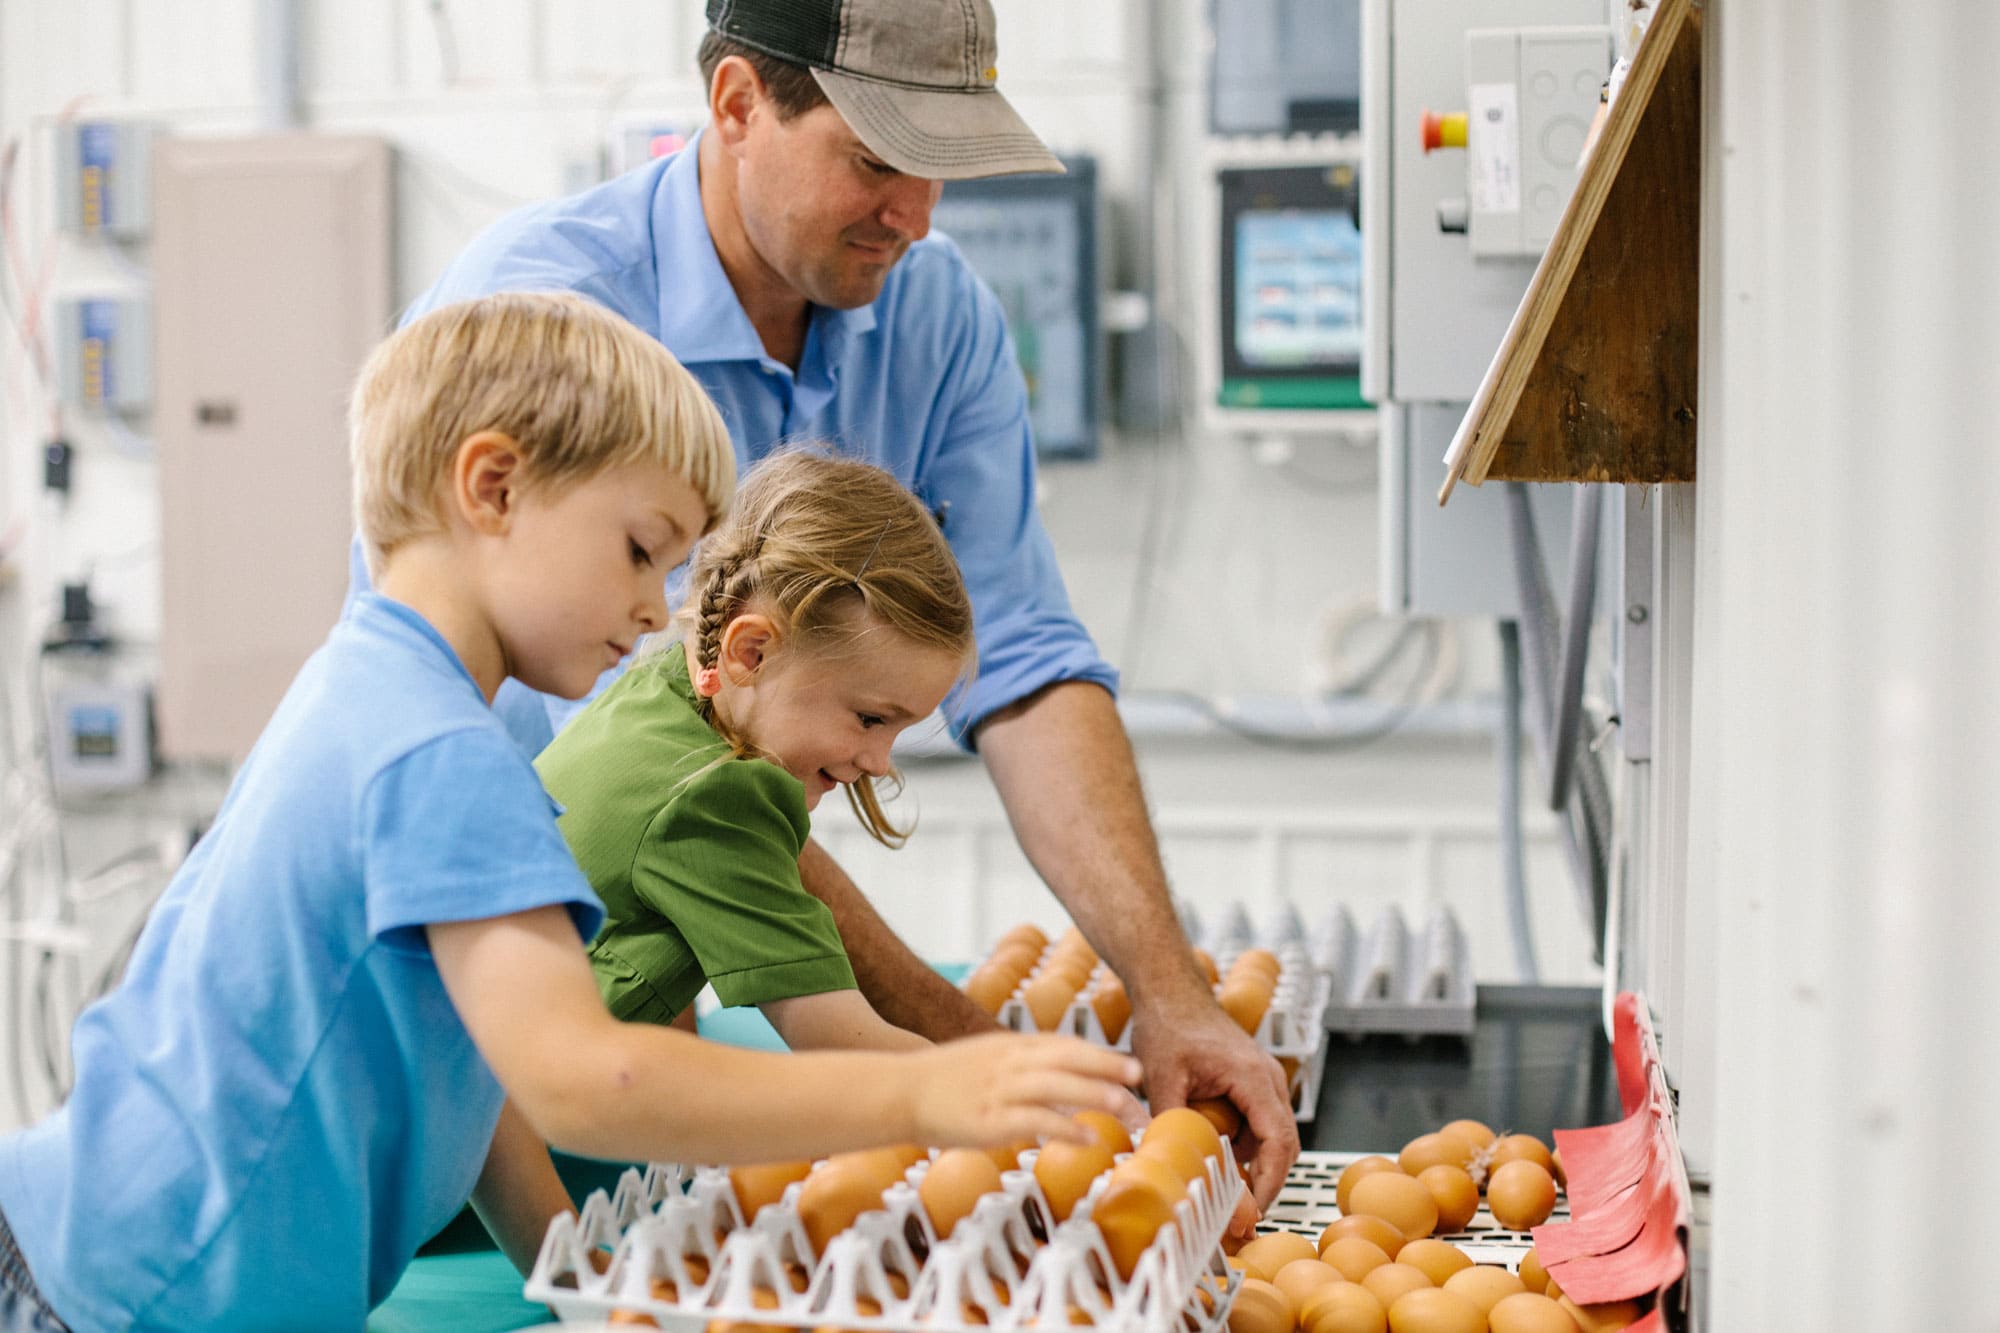 A male farmer helping a boy and a girl put eggs in cartons in a very clean, high tech looking room.